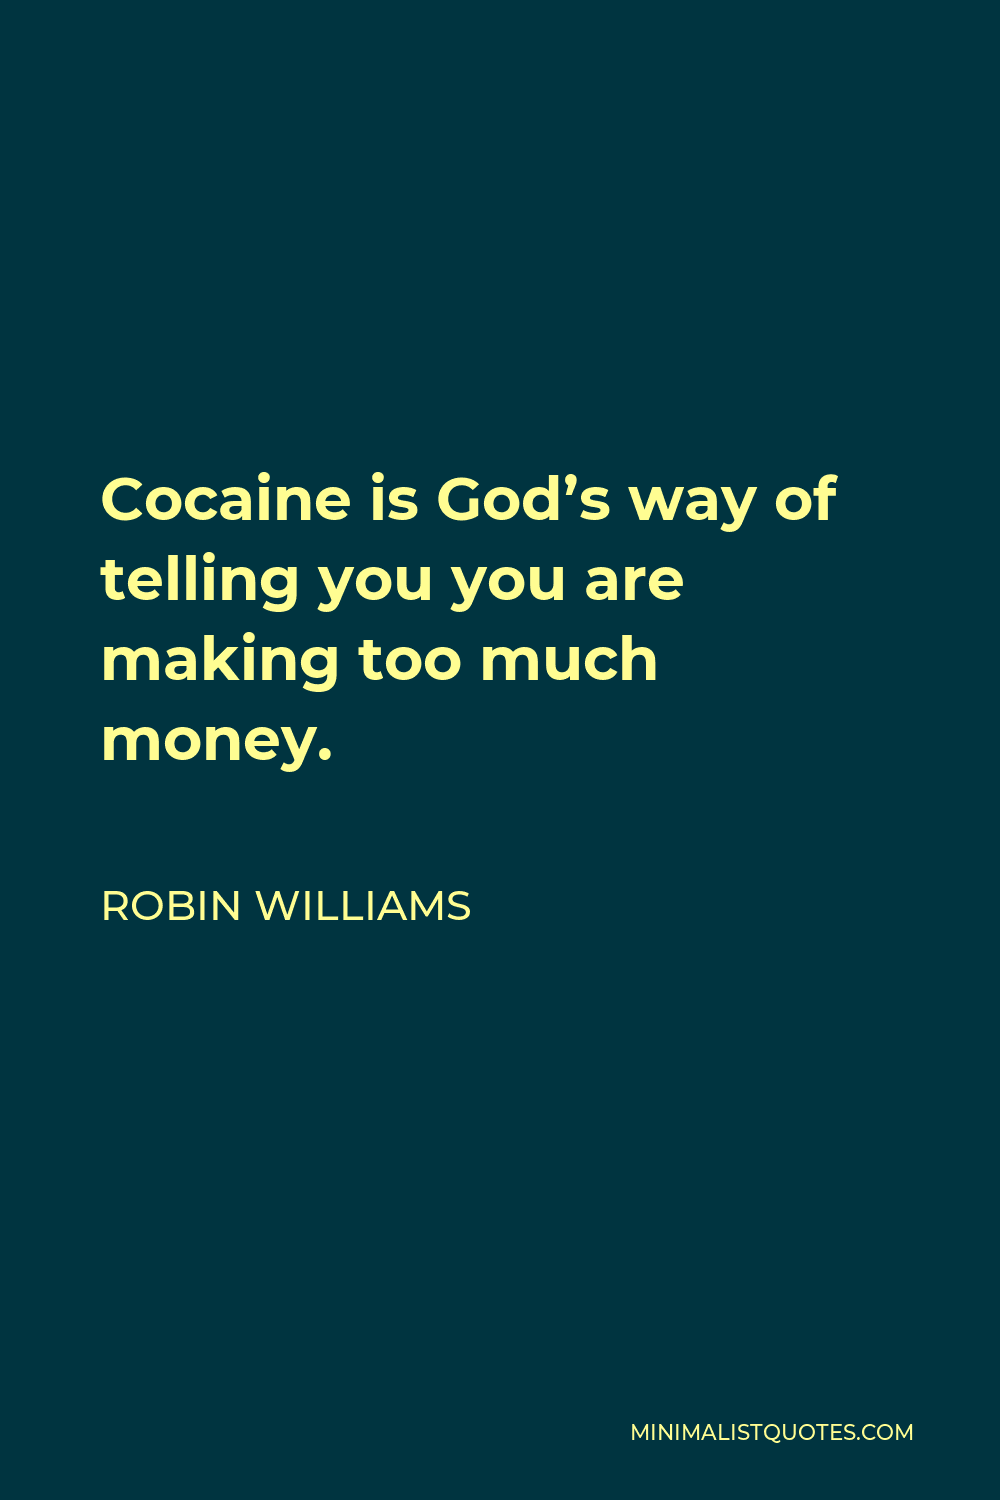 Robin Williams Quote - Cocaine is God’s way of telling you you are making too much money.